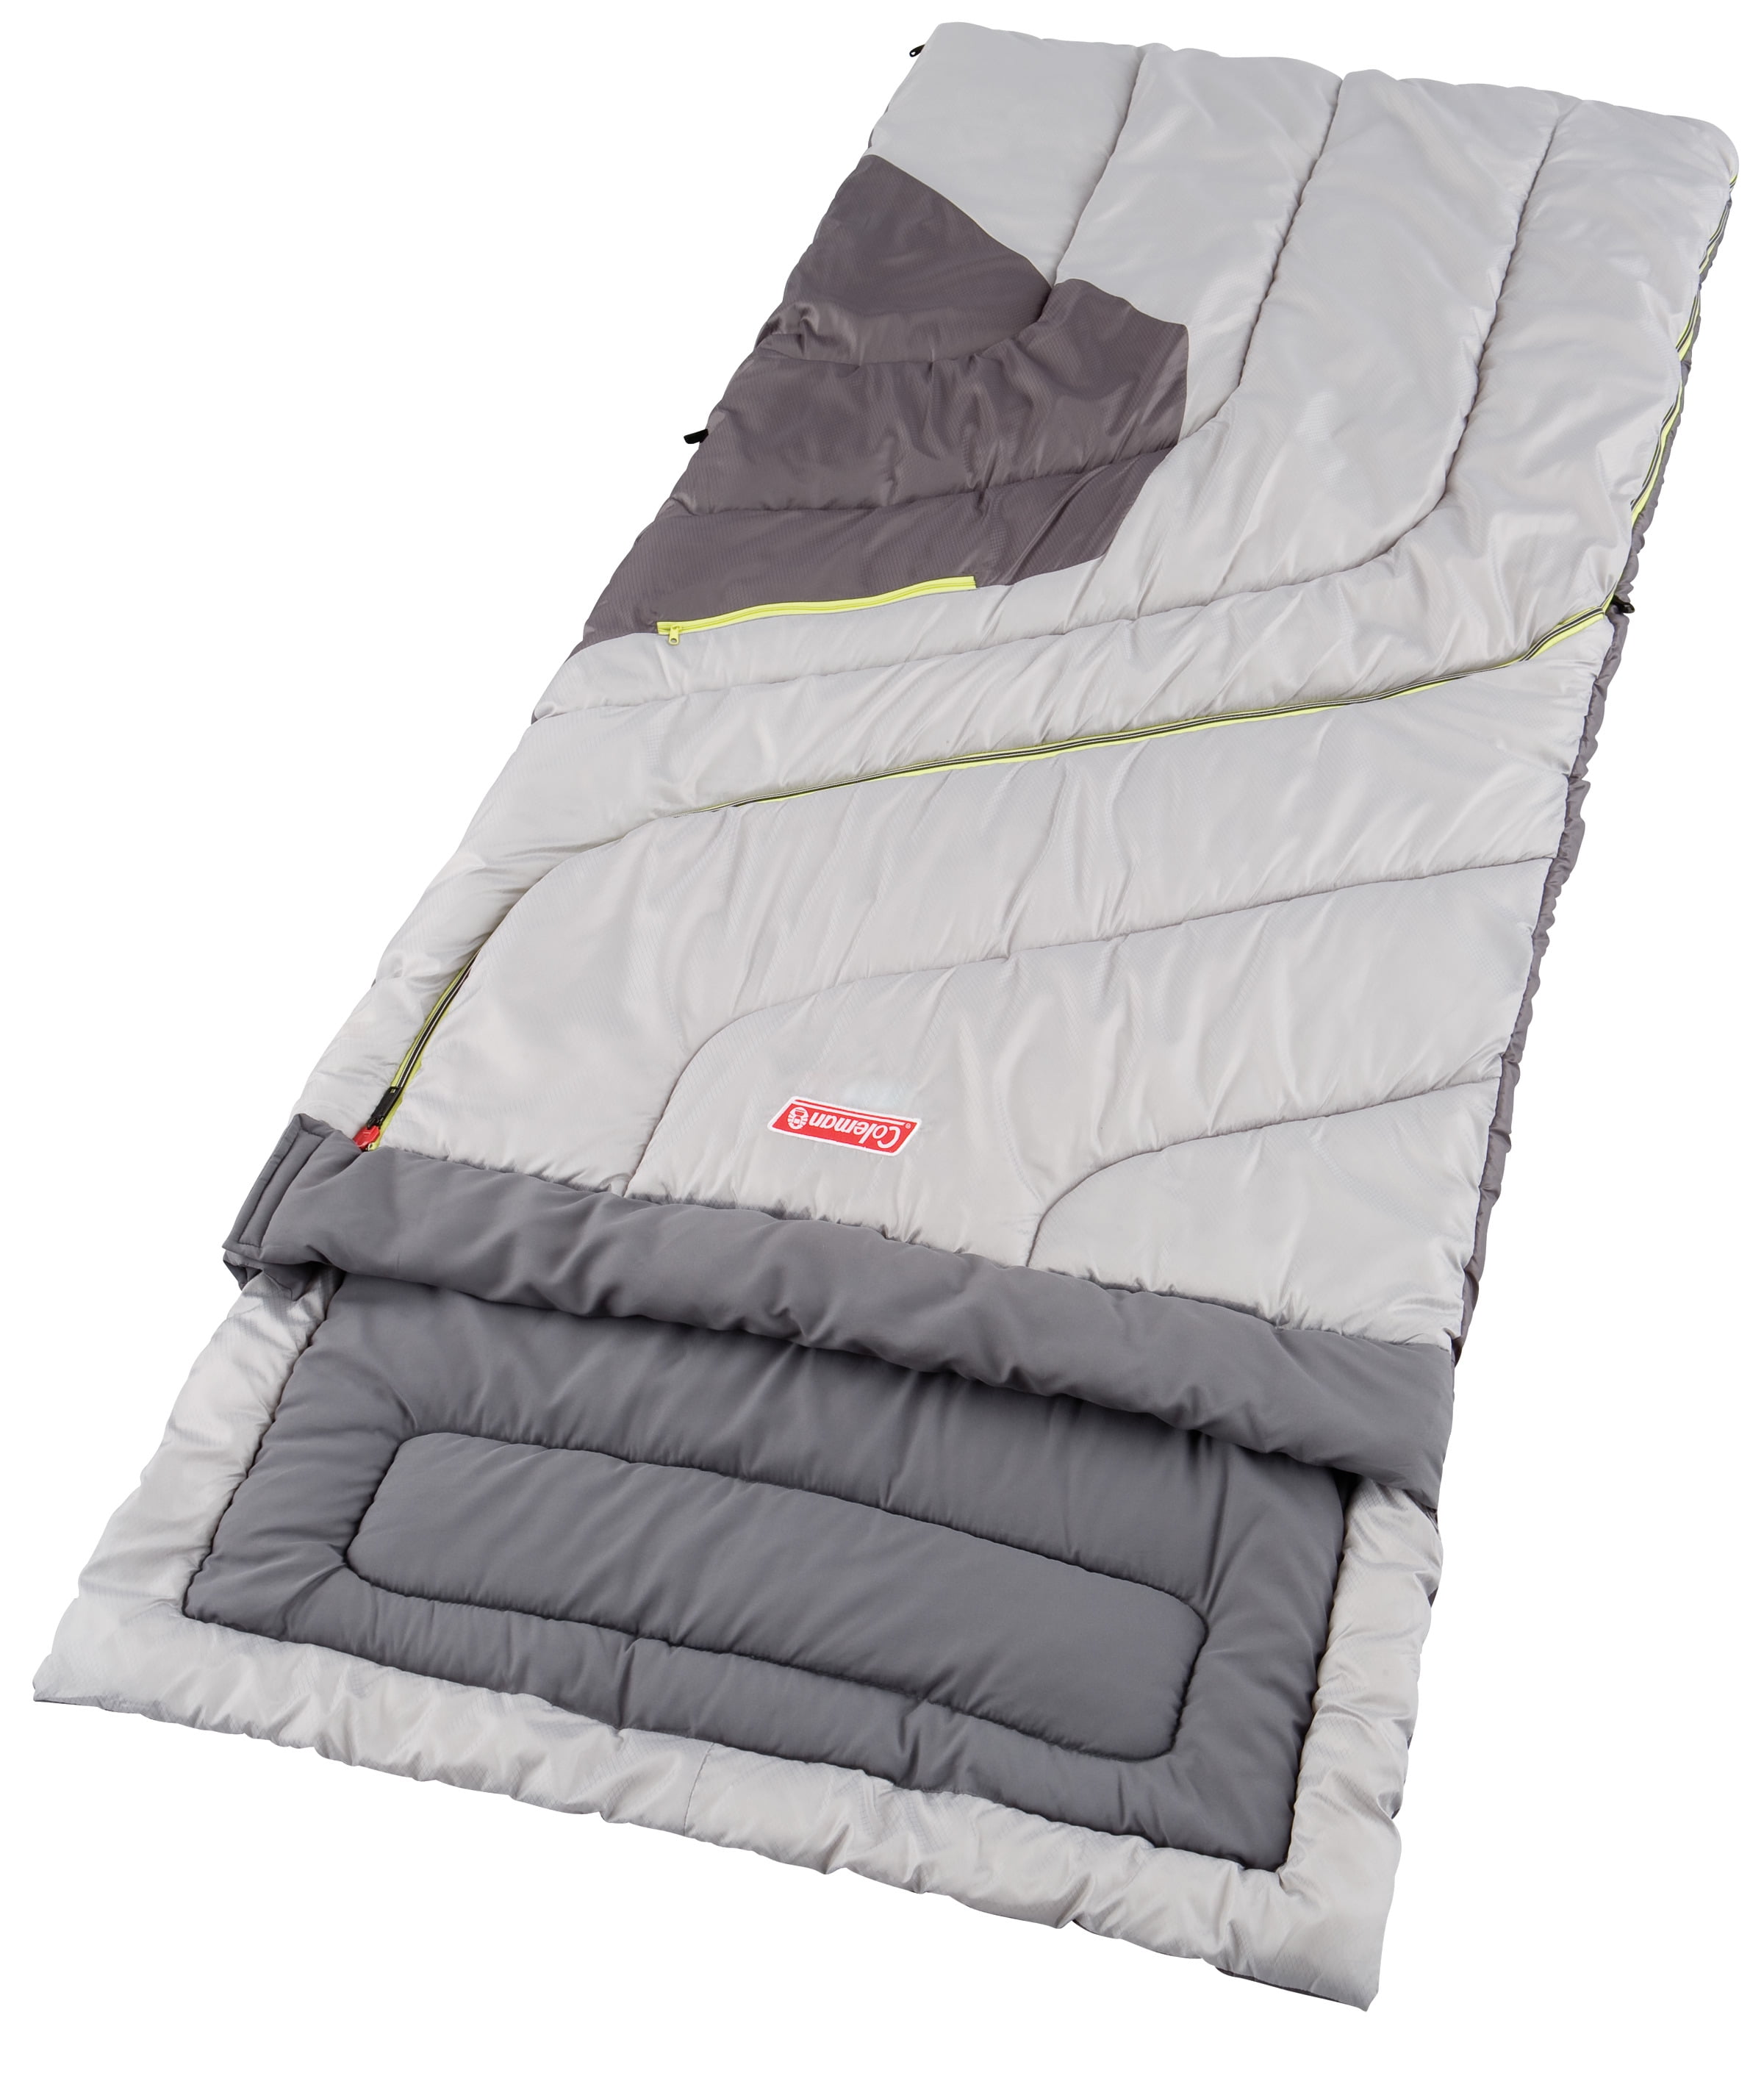 Details about   Coleman Sleeping Bag40°F Big and Tall Sleeping BagBiscayne Sleeping Bag 